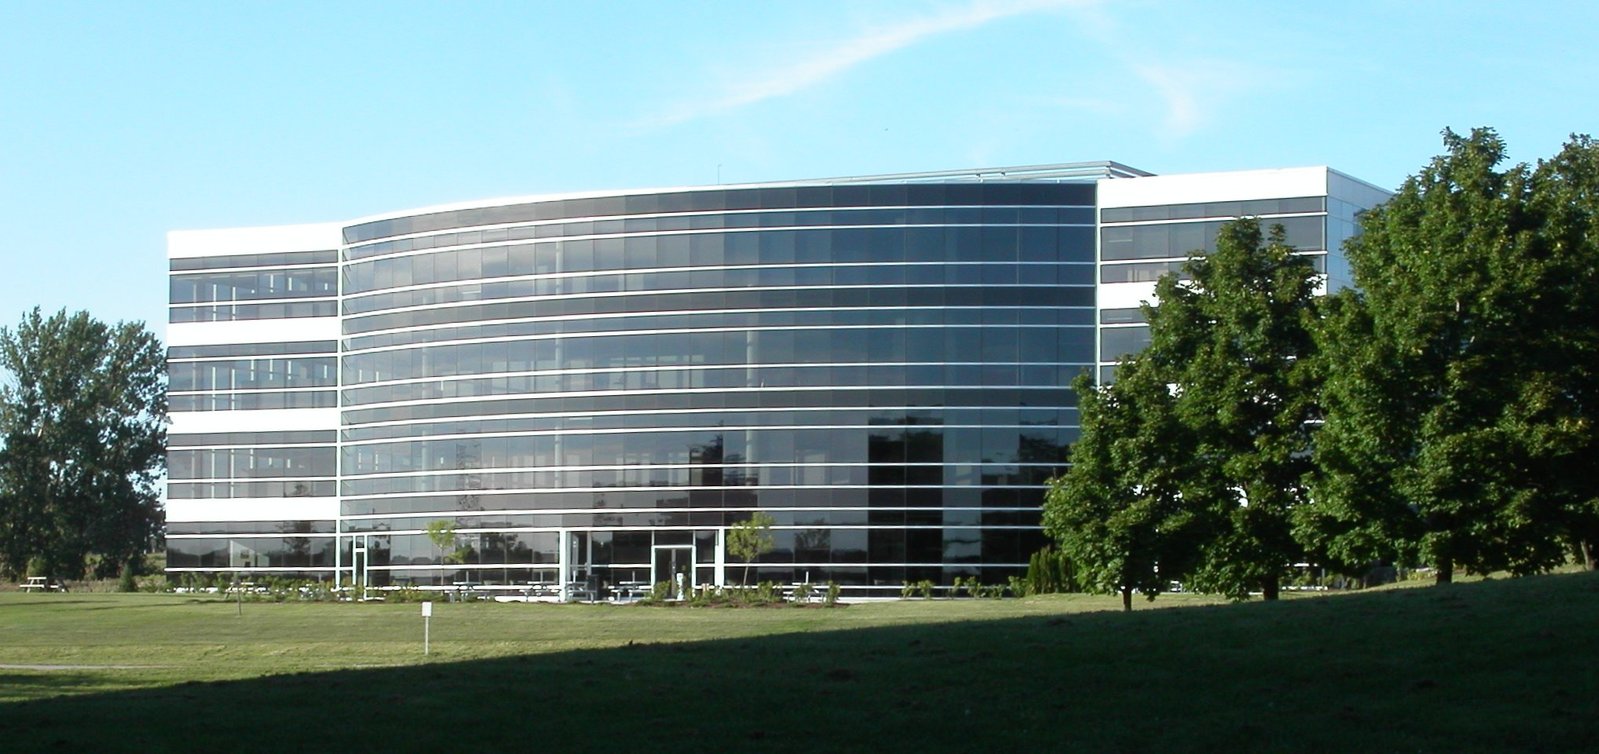 the large building is next to the grassy area